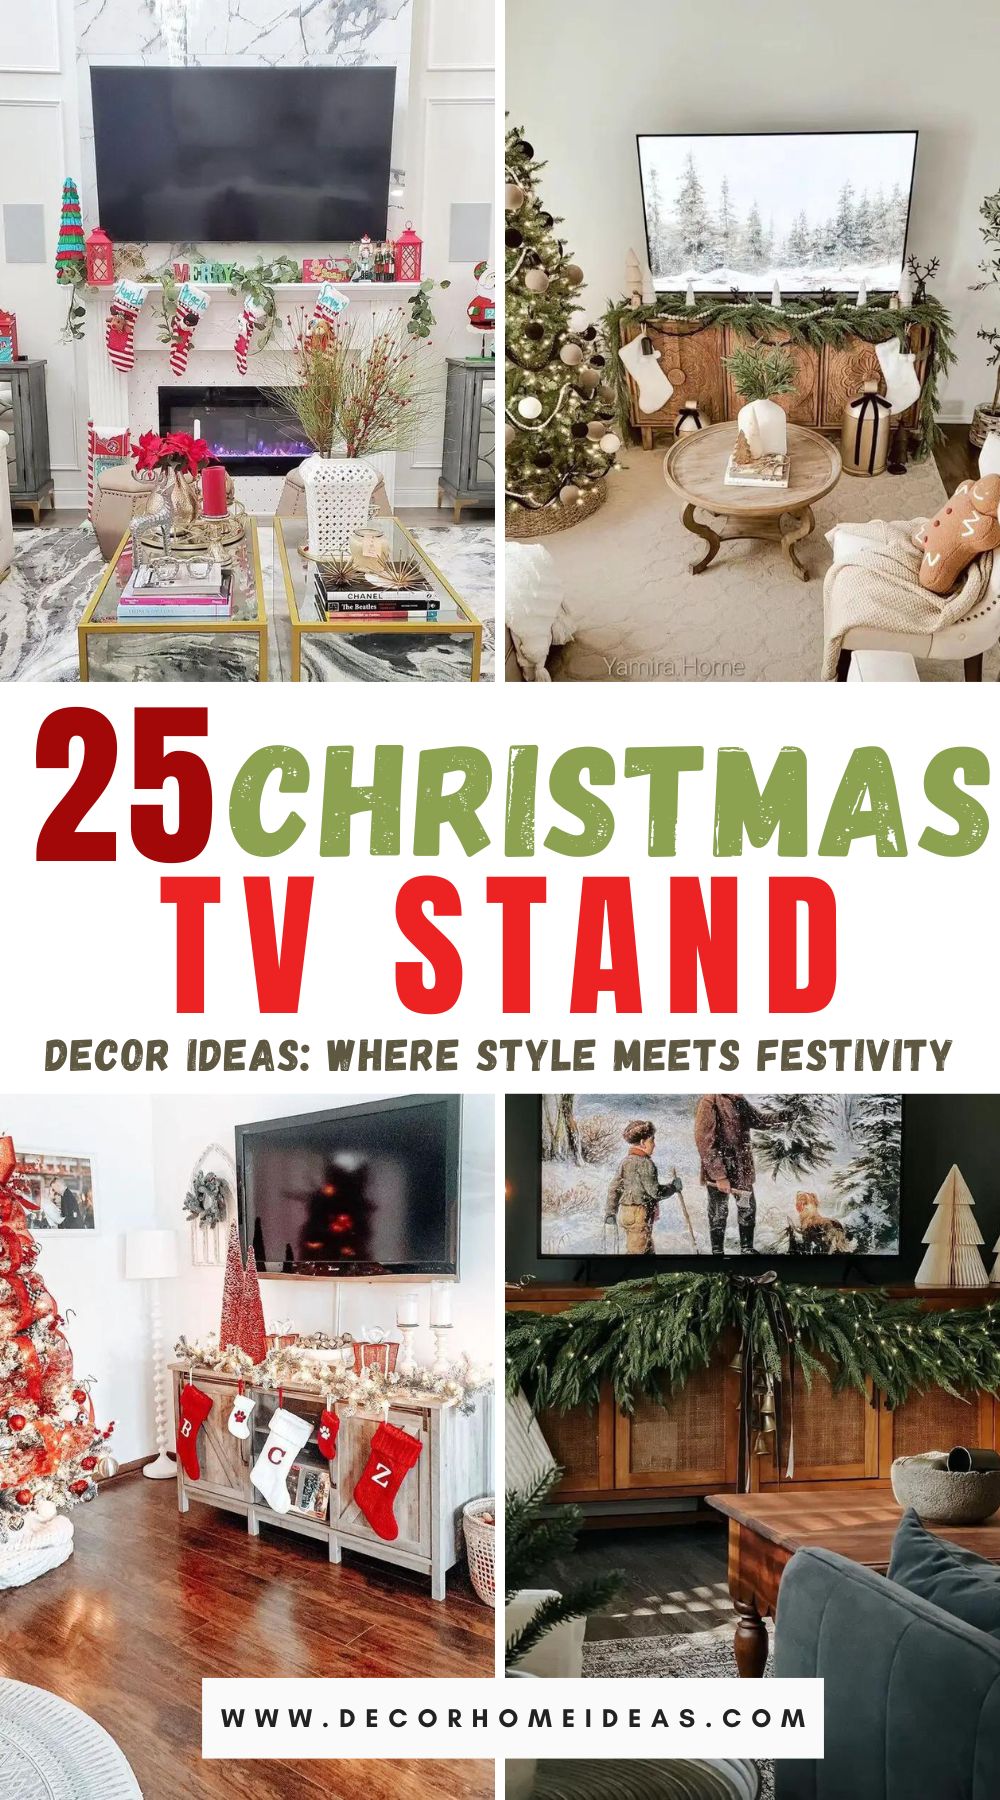 Looking for stylish ways to decorate your TV stand this Christmas? Explore 25 creative ideas for Christmas TV stand decor. Elevate your home's festive ambiance with a touch of creativity.